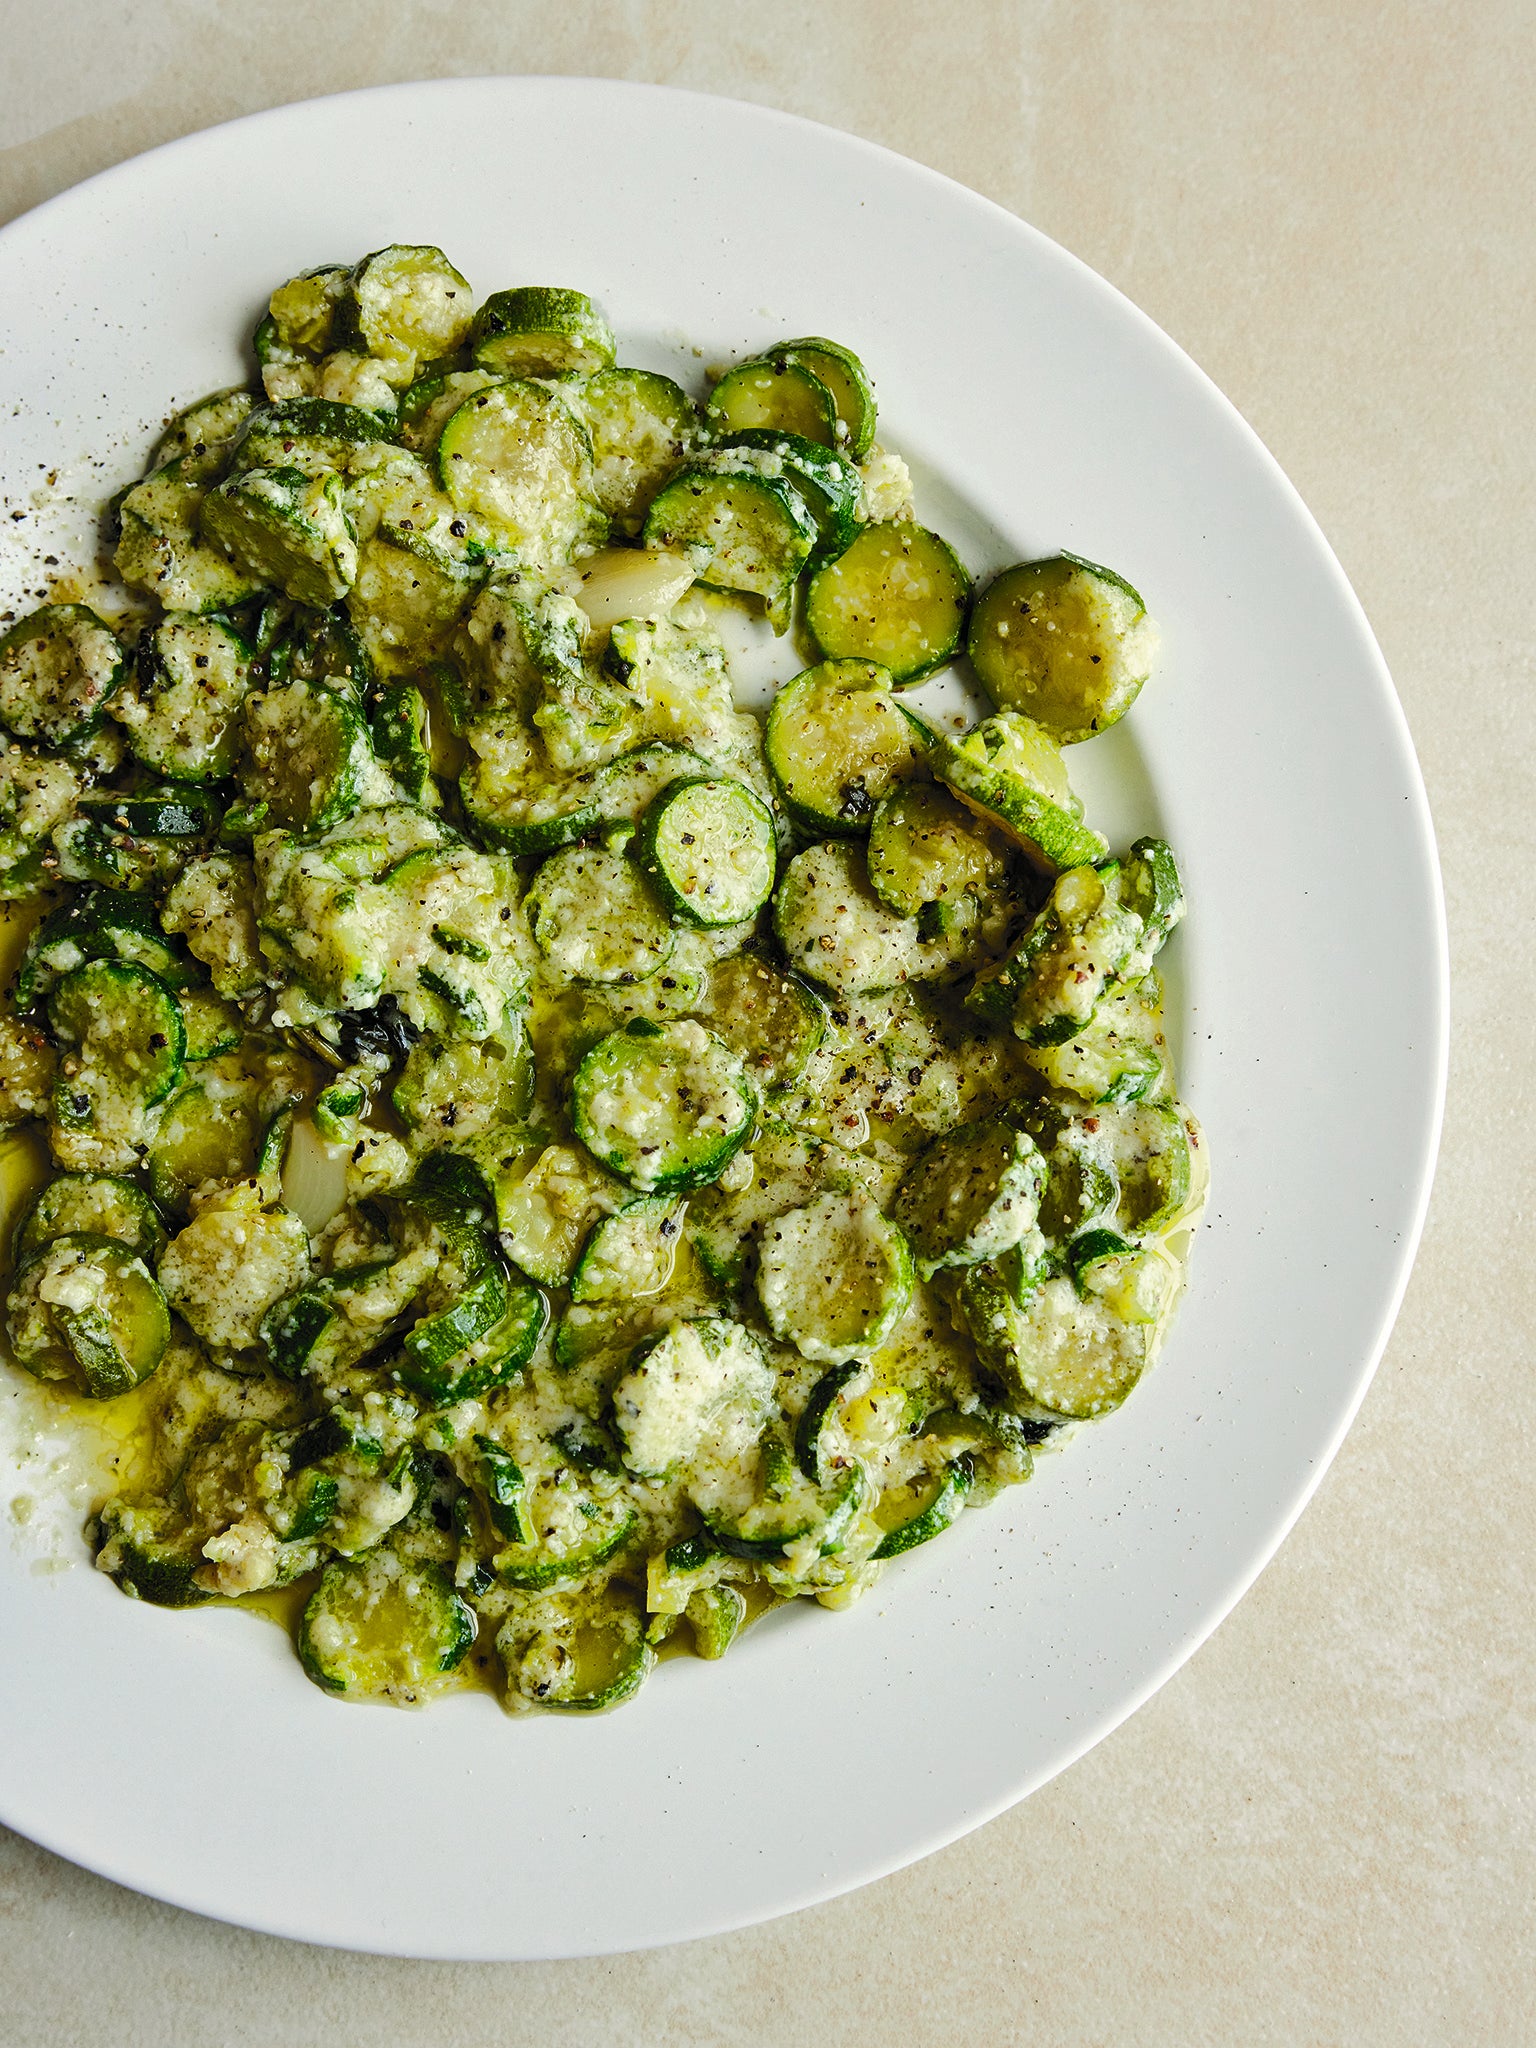 Something magical happens when you braise courgettes in their own juices